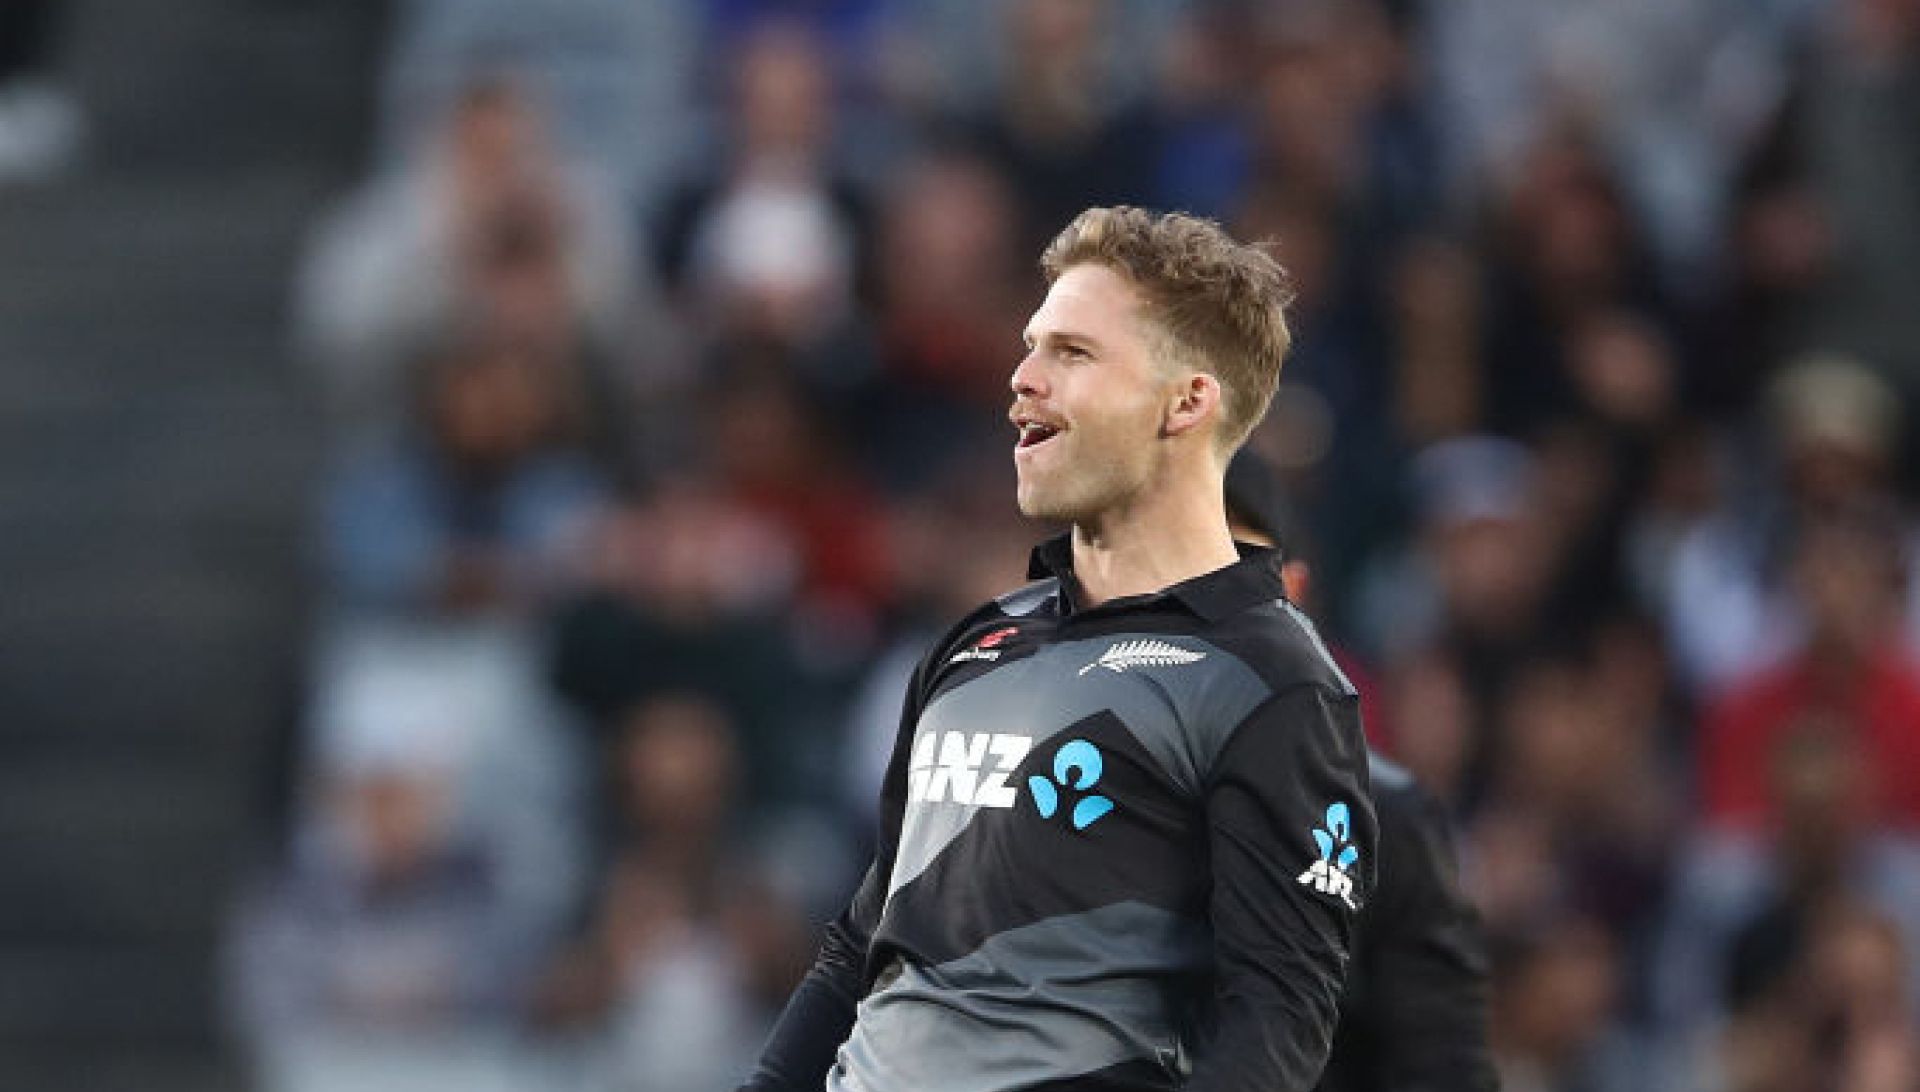 Lockie Ferguson available for selection in challenging series vs India: New Zealand coach Stead